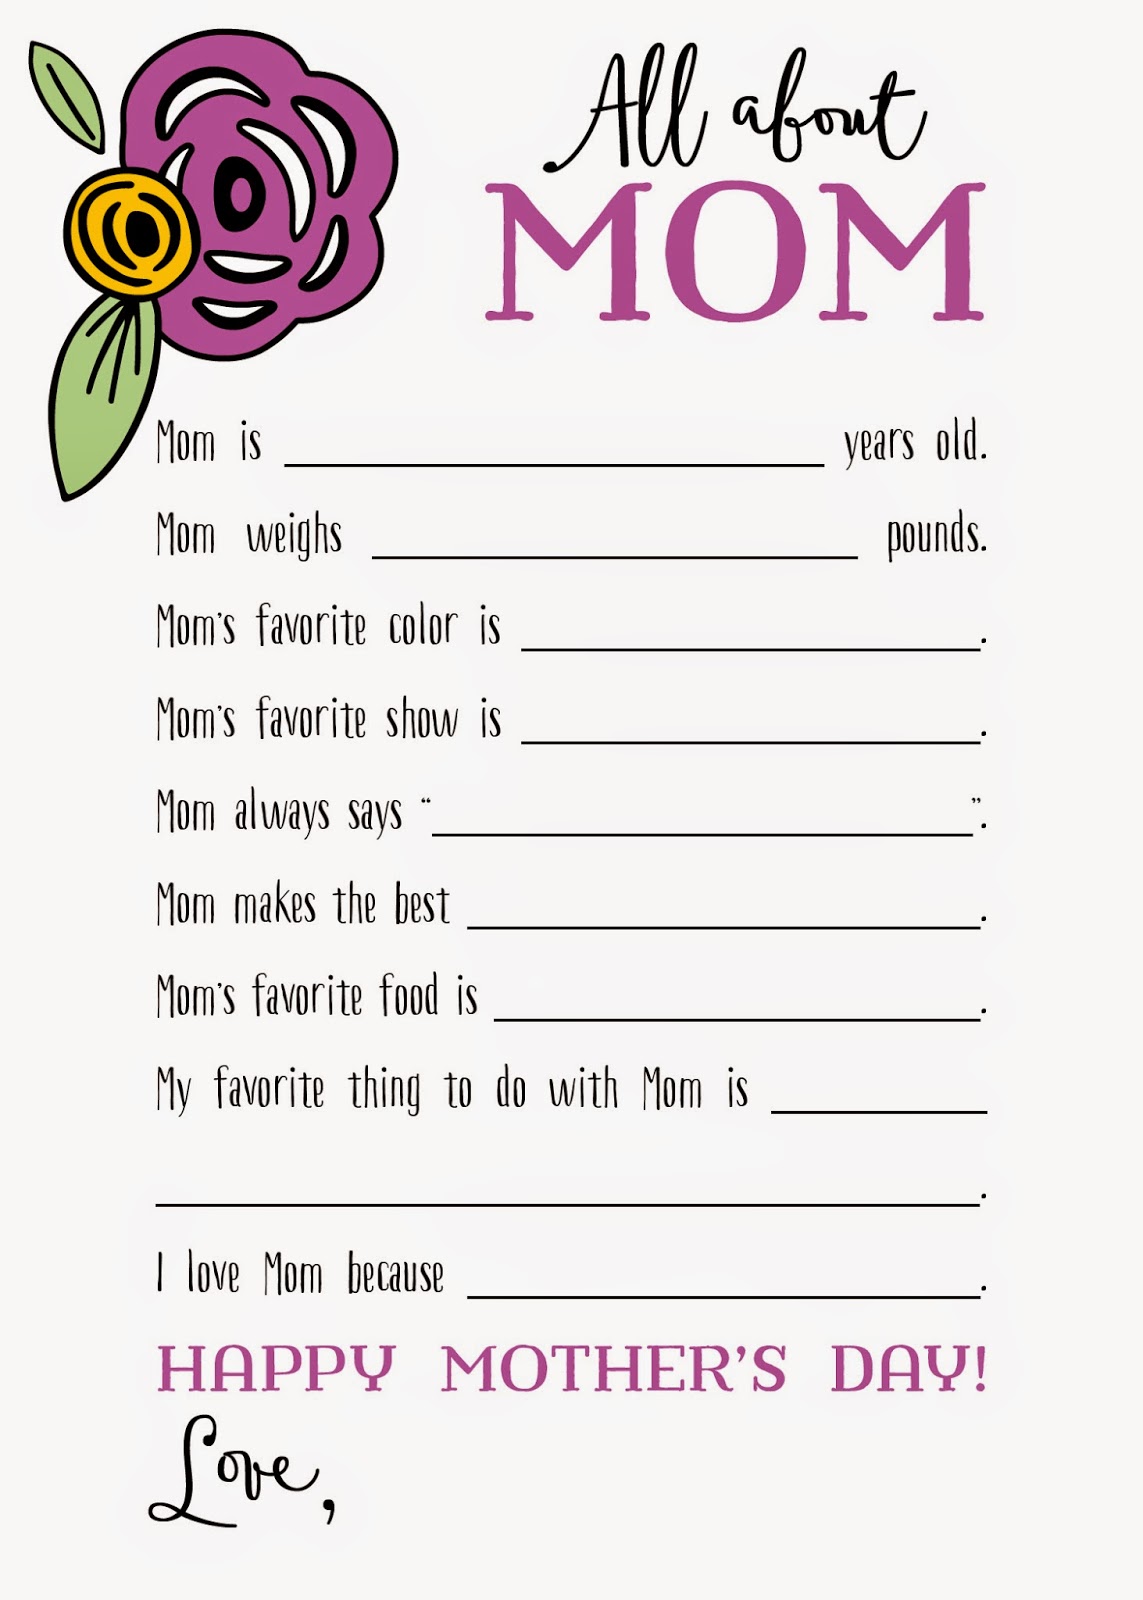 Free Printable All About Mom